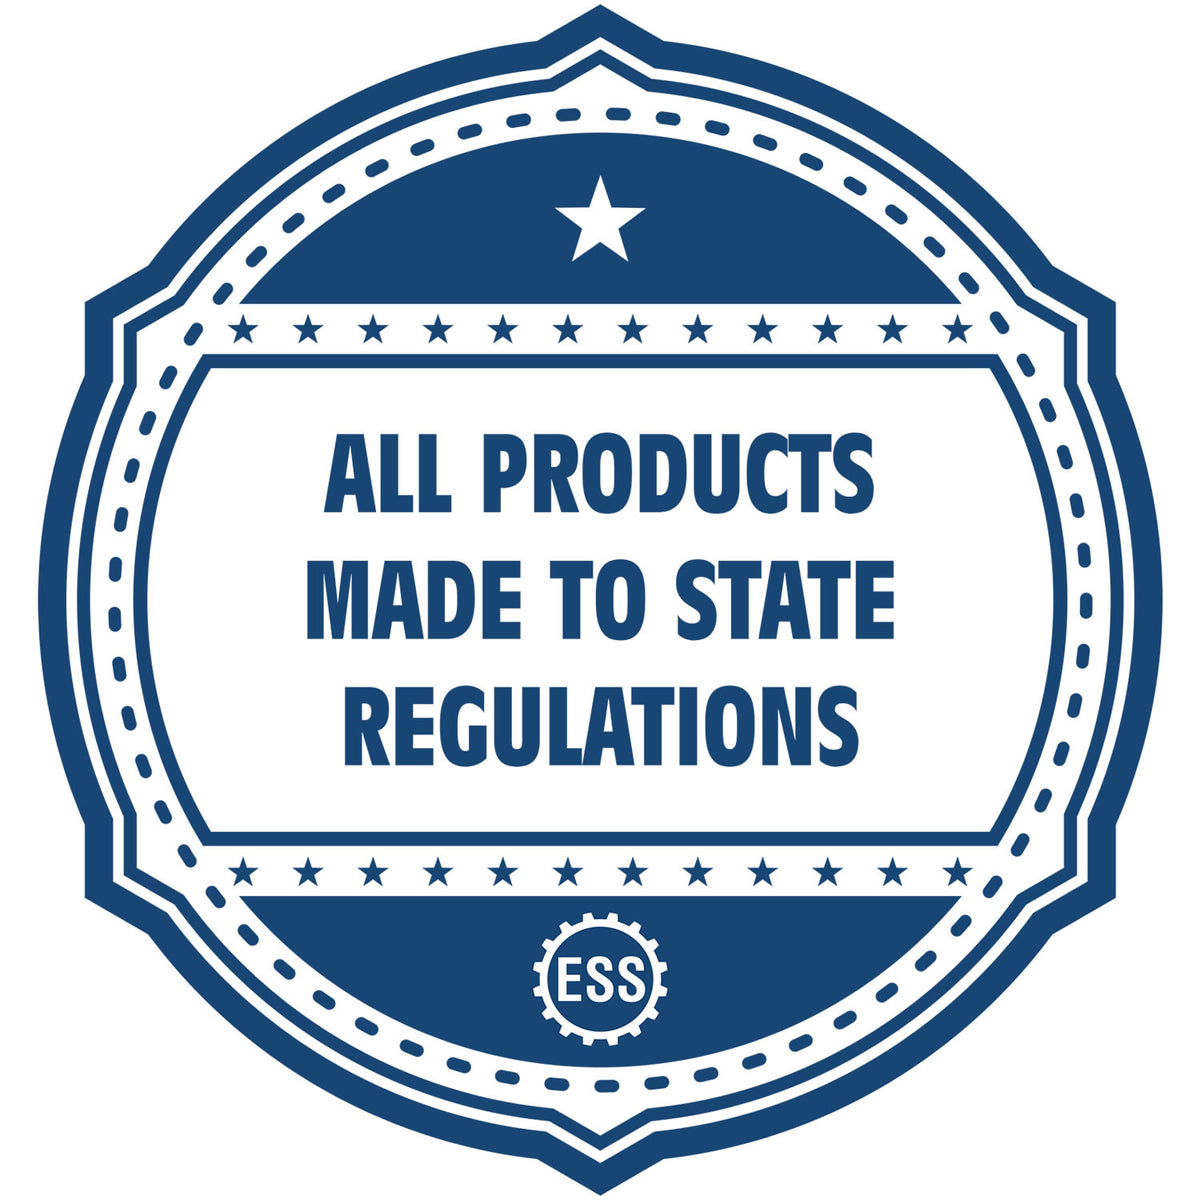 An icon or badge element for the Handheld Texas Architect Seal Embosser showing that this product is made in compliance with state regulations.